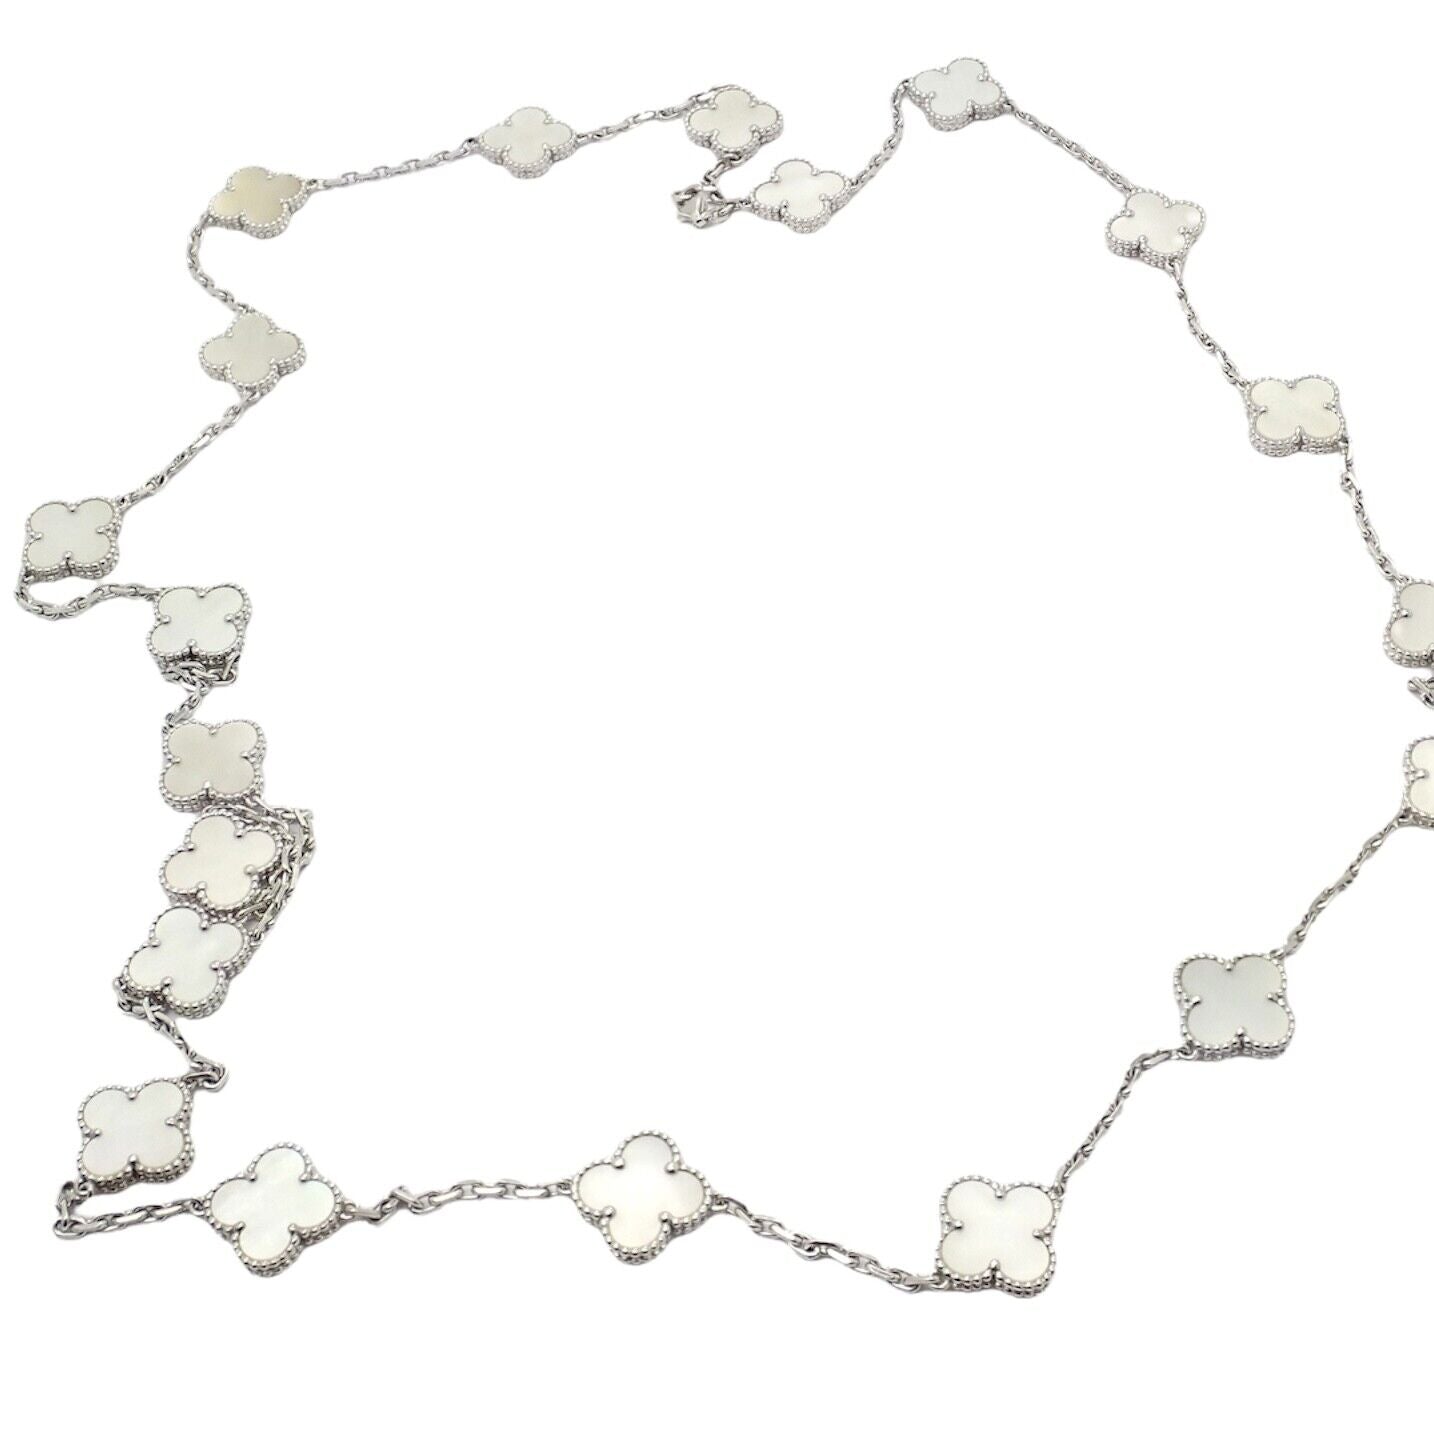 18k Yellow Gold Van Cleef & Arpels Vintage Alhambra Necklace 10 Motifs  Mother-of-pearl